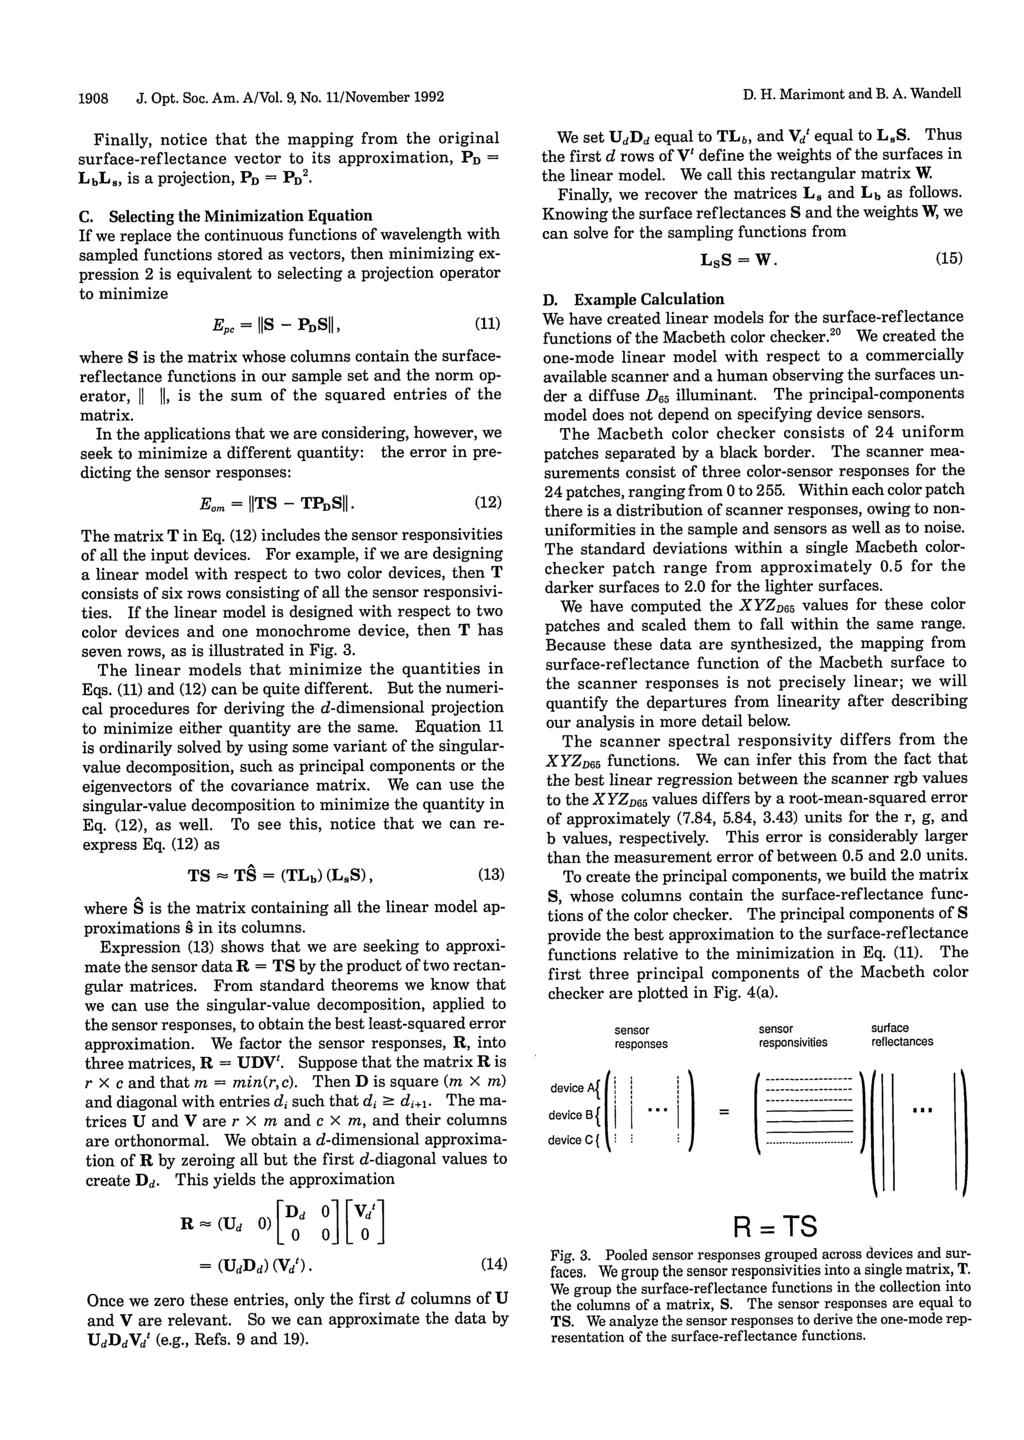 1908 J. Opt. Soc. Am. A/Vol. 9, No. 11/November 1992 Finally, notice that the mapping from the original surface-reflectance vector to its approximation, PD= LbL., is a projection, PD = PD 2. C.